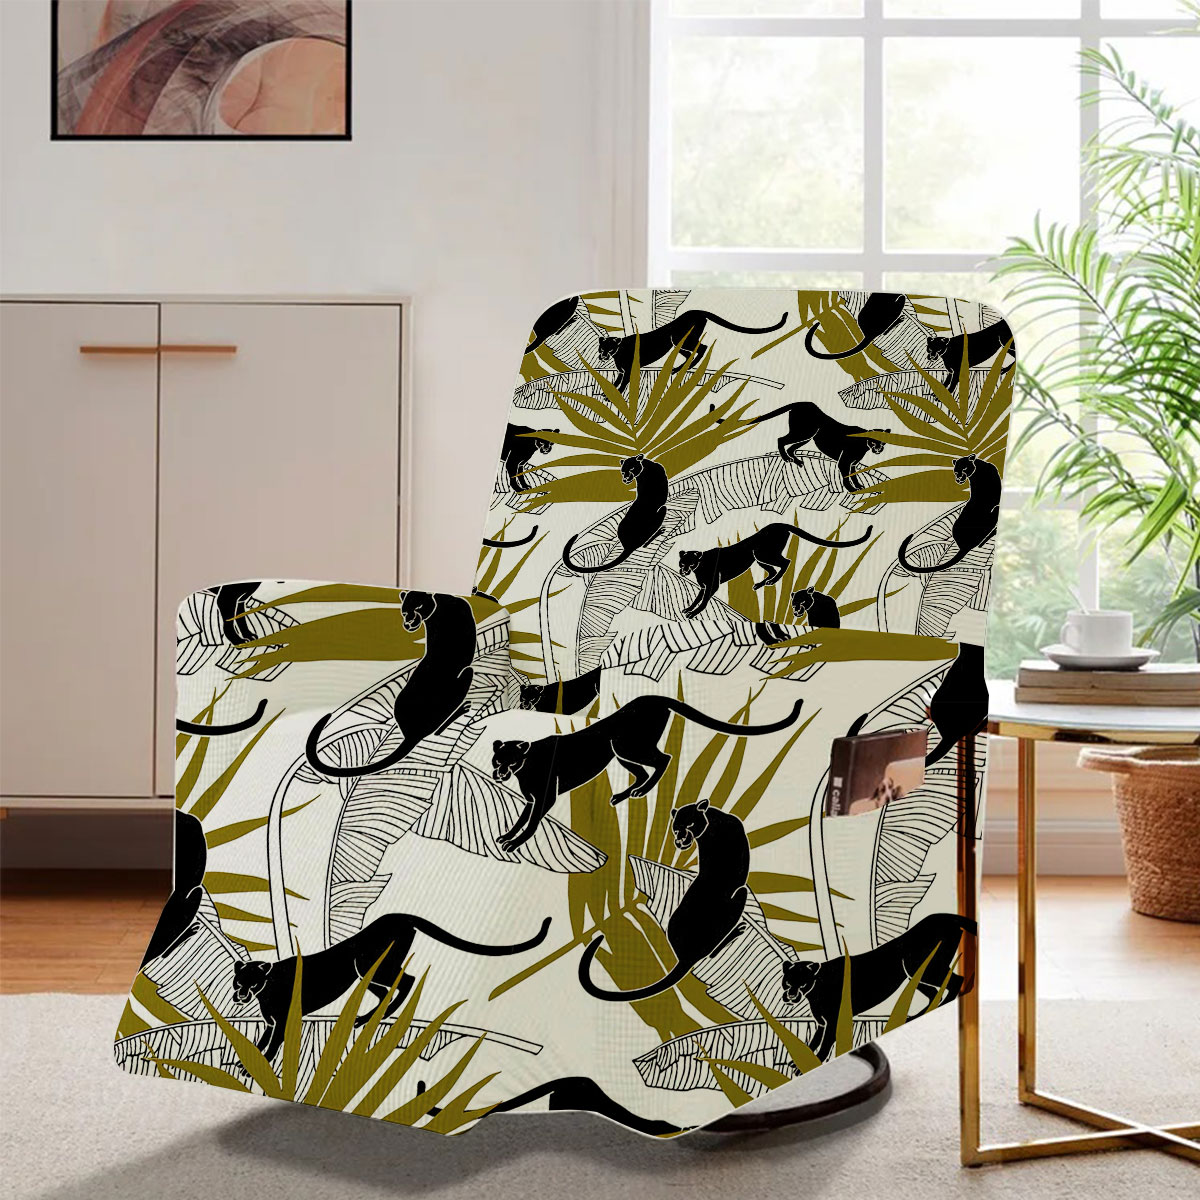 Tropical Black Panther Recliner Slipcover